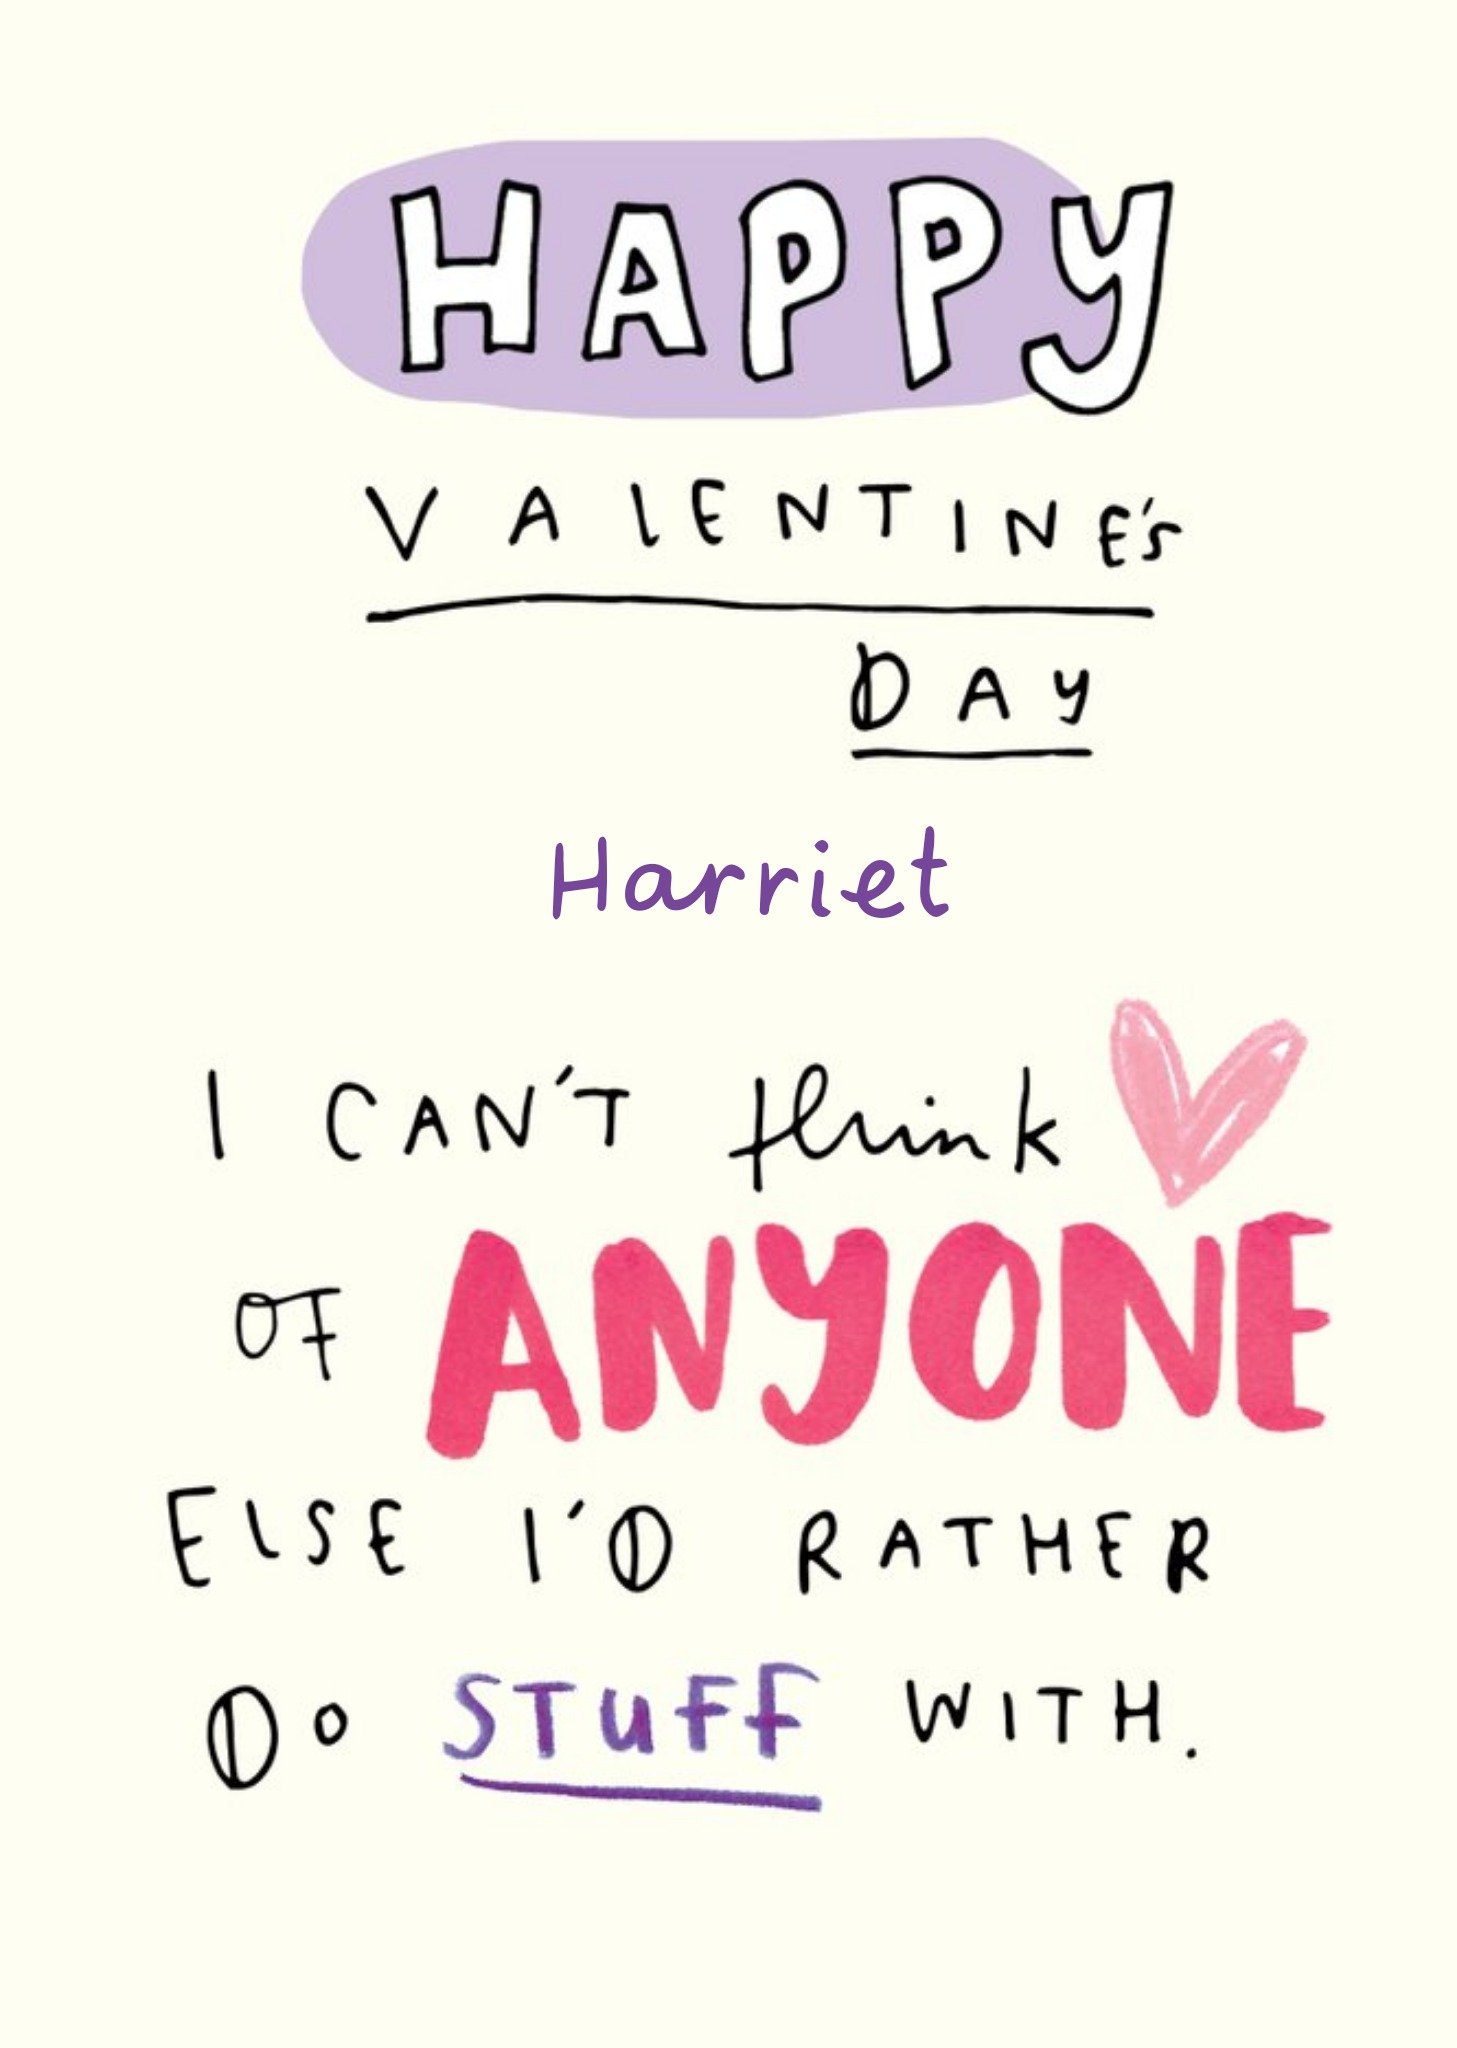 Moonpig The Happy News Funny Cute Valentines Day Card, Large